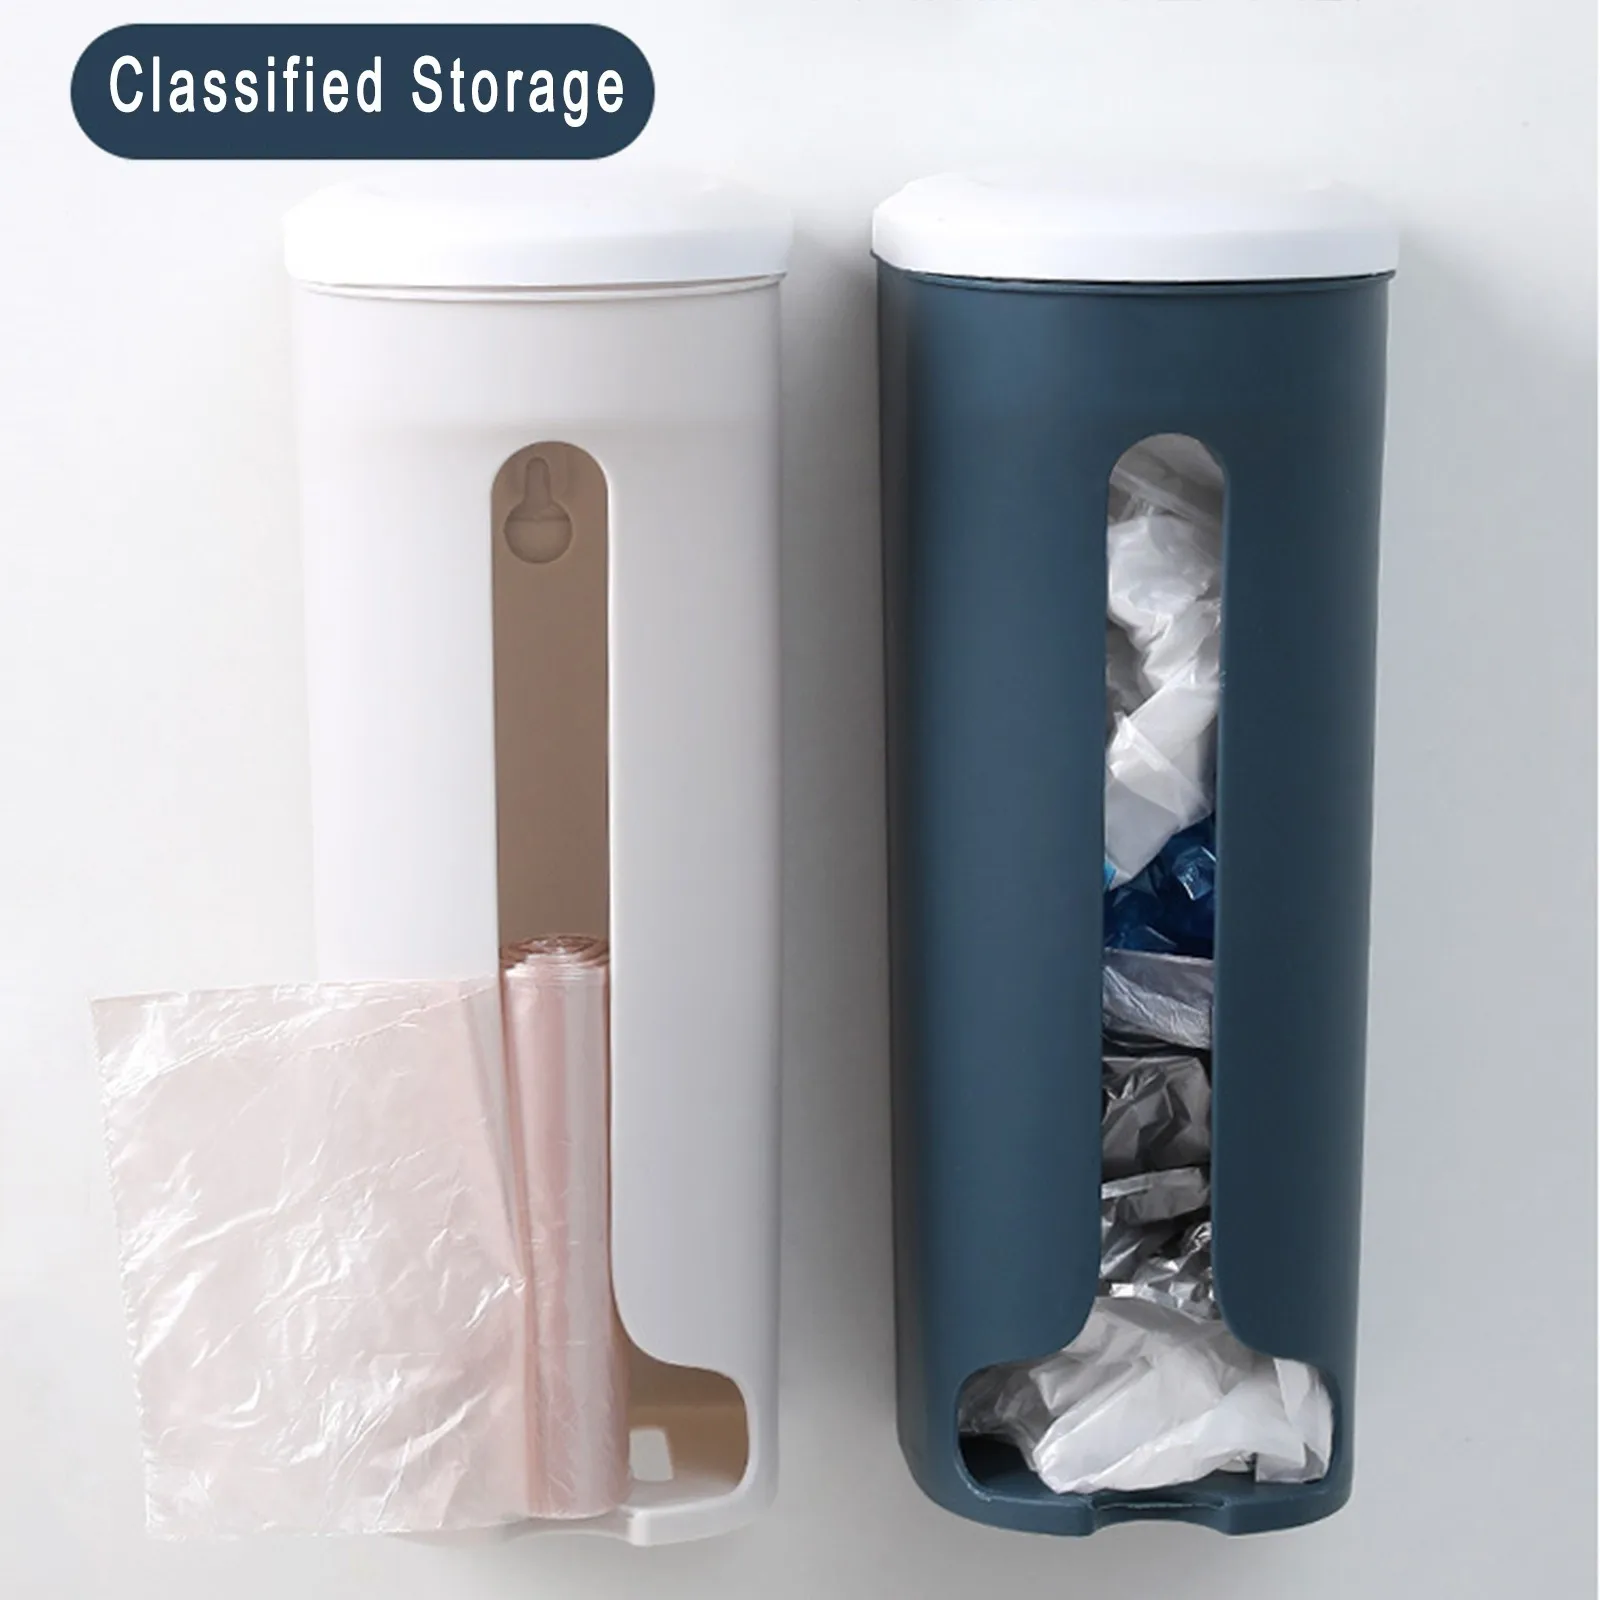 Garbage Bag Storage Box Home Kitchen Bathroom Wall Hanging Plastic Storing Rack Removable Container Household Storage Box Holder